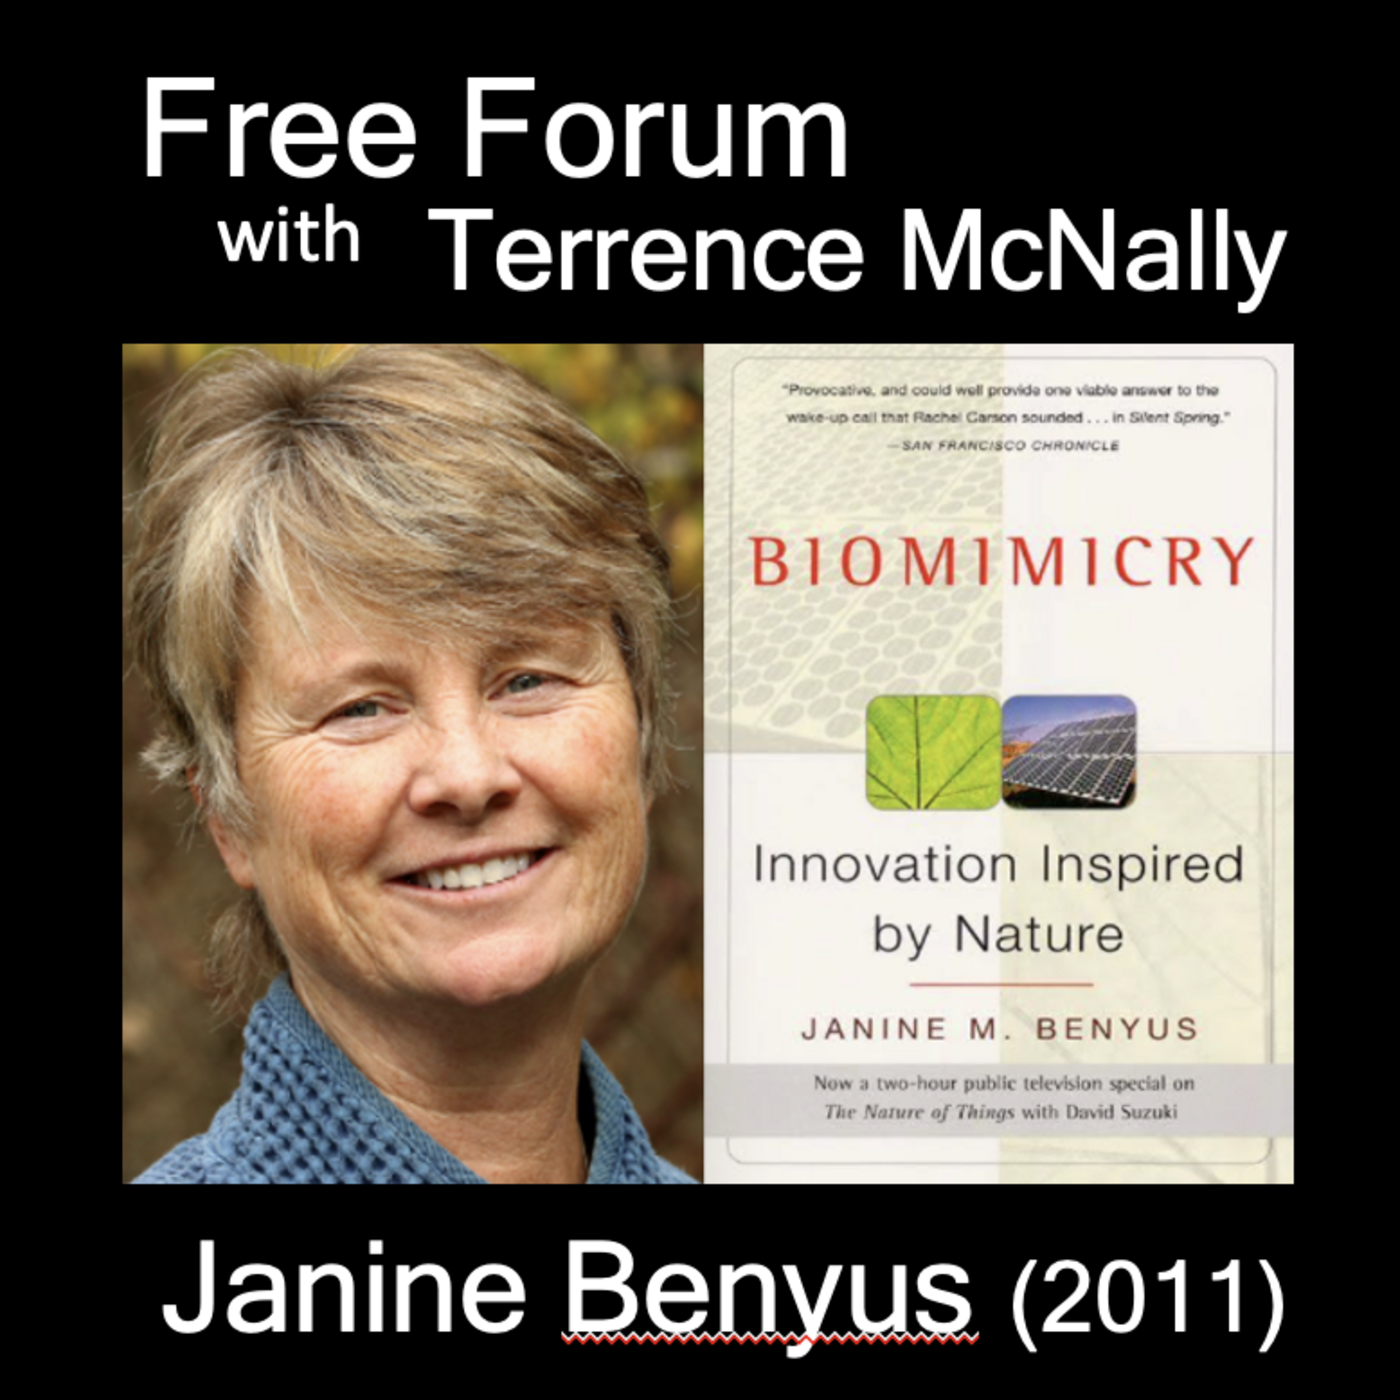 Episode 640: What would nature do? JANINE BENYUS, BIOMIMICRY: Innovation Inspired by Nature